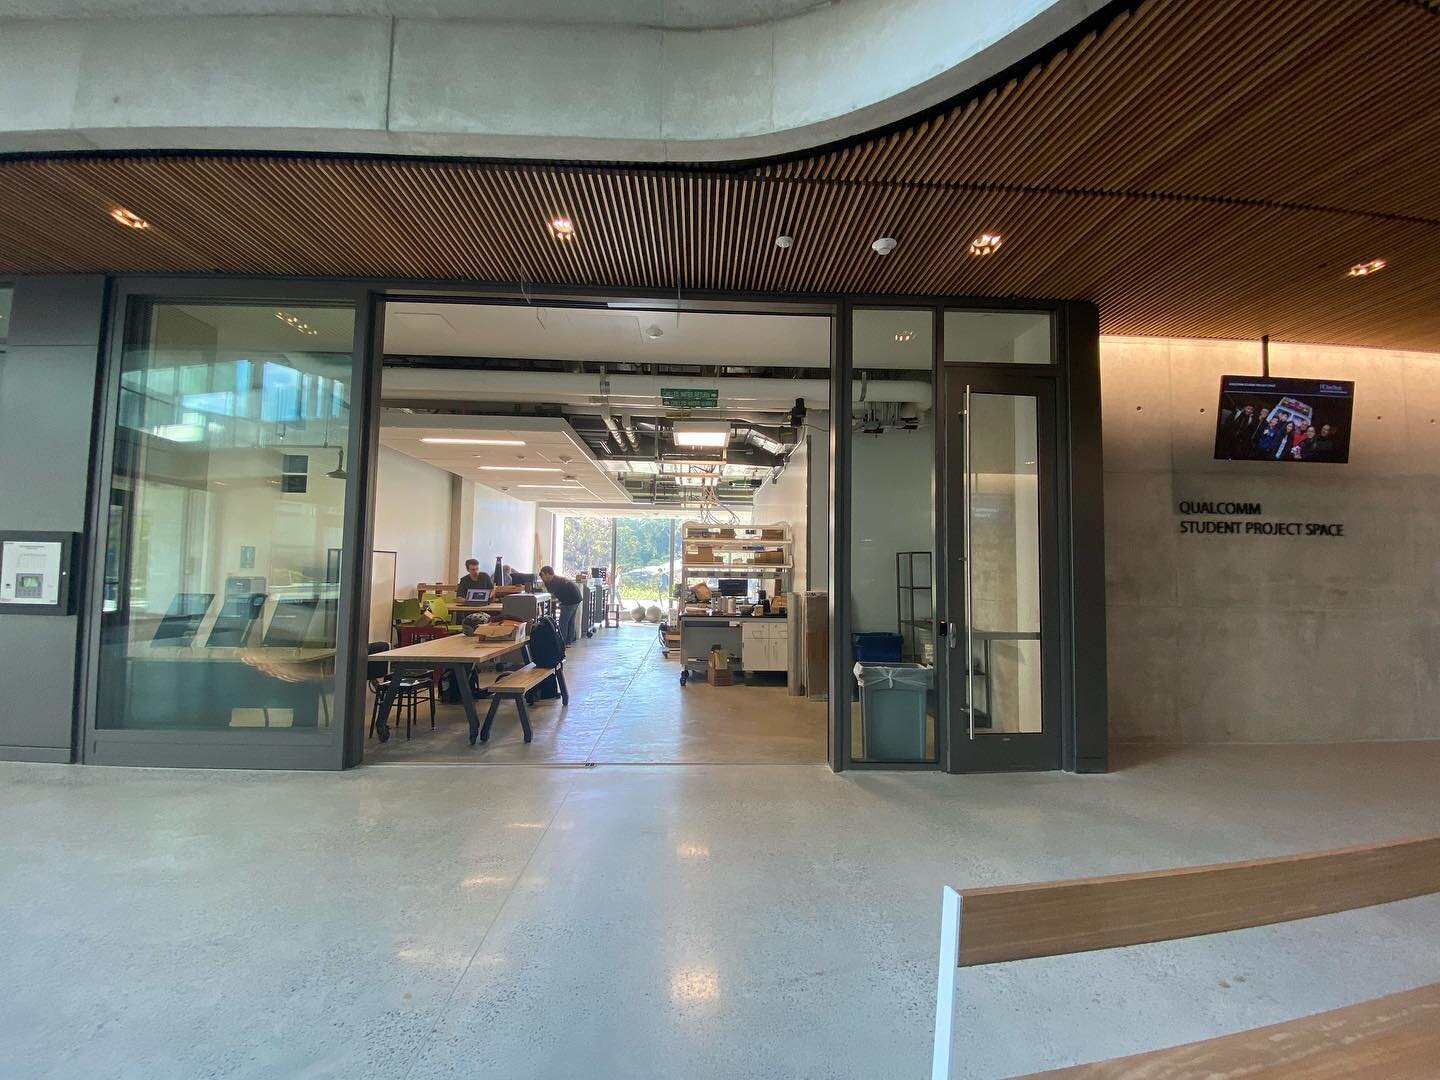 RPL is excited to share that we have moved into the Qualcomm Student Project Space in Franklin Antonio Hall with Yonder Deep @yonderdeep! We are so grateful for this opportunity and can&rsquo;t wait to start doing what we do best&mdash;building rocke